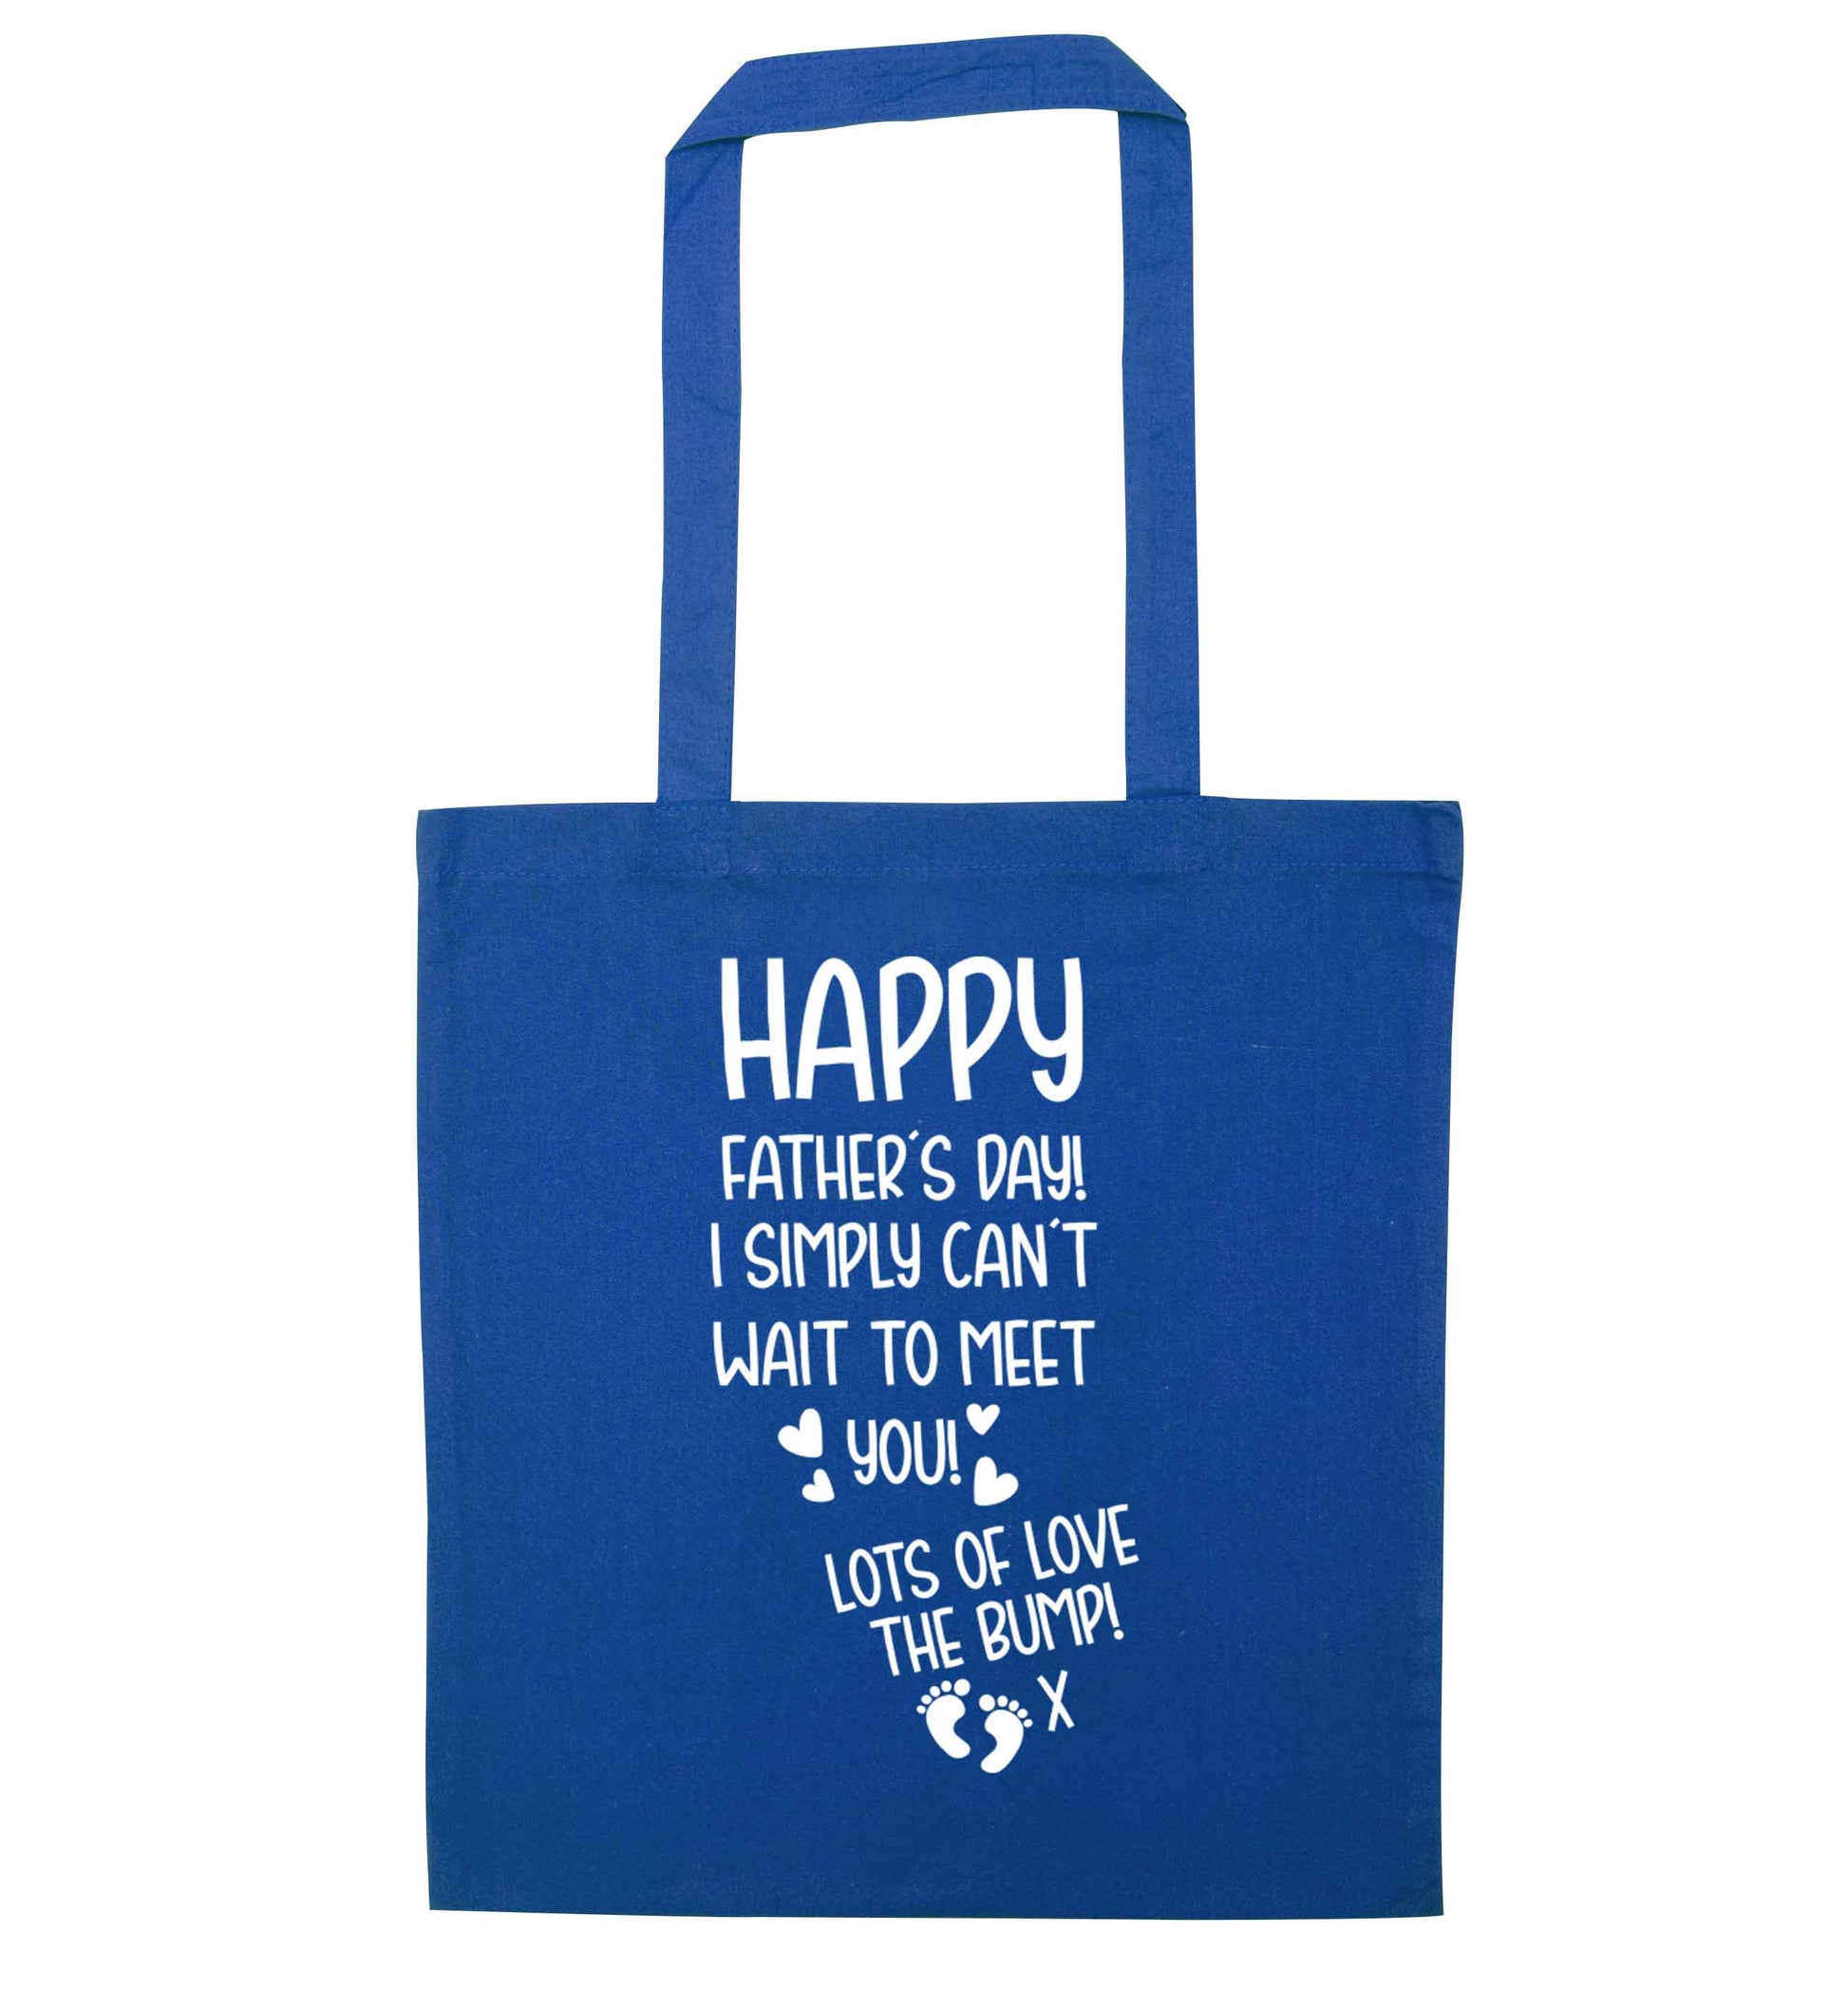 Happy Father's day daddy I can't wait to meet you lot's of love the bump! blue tote bag